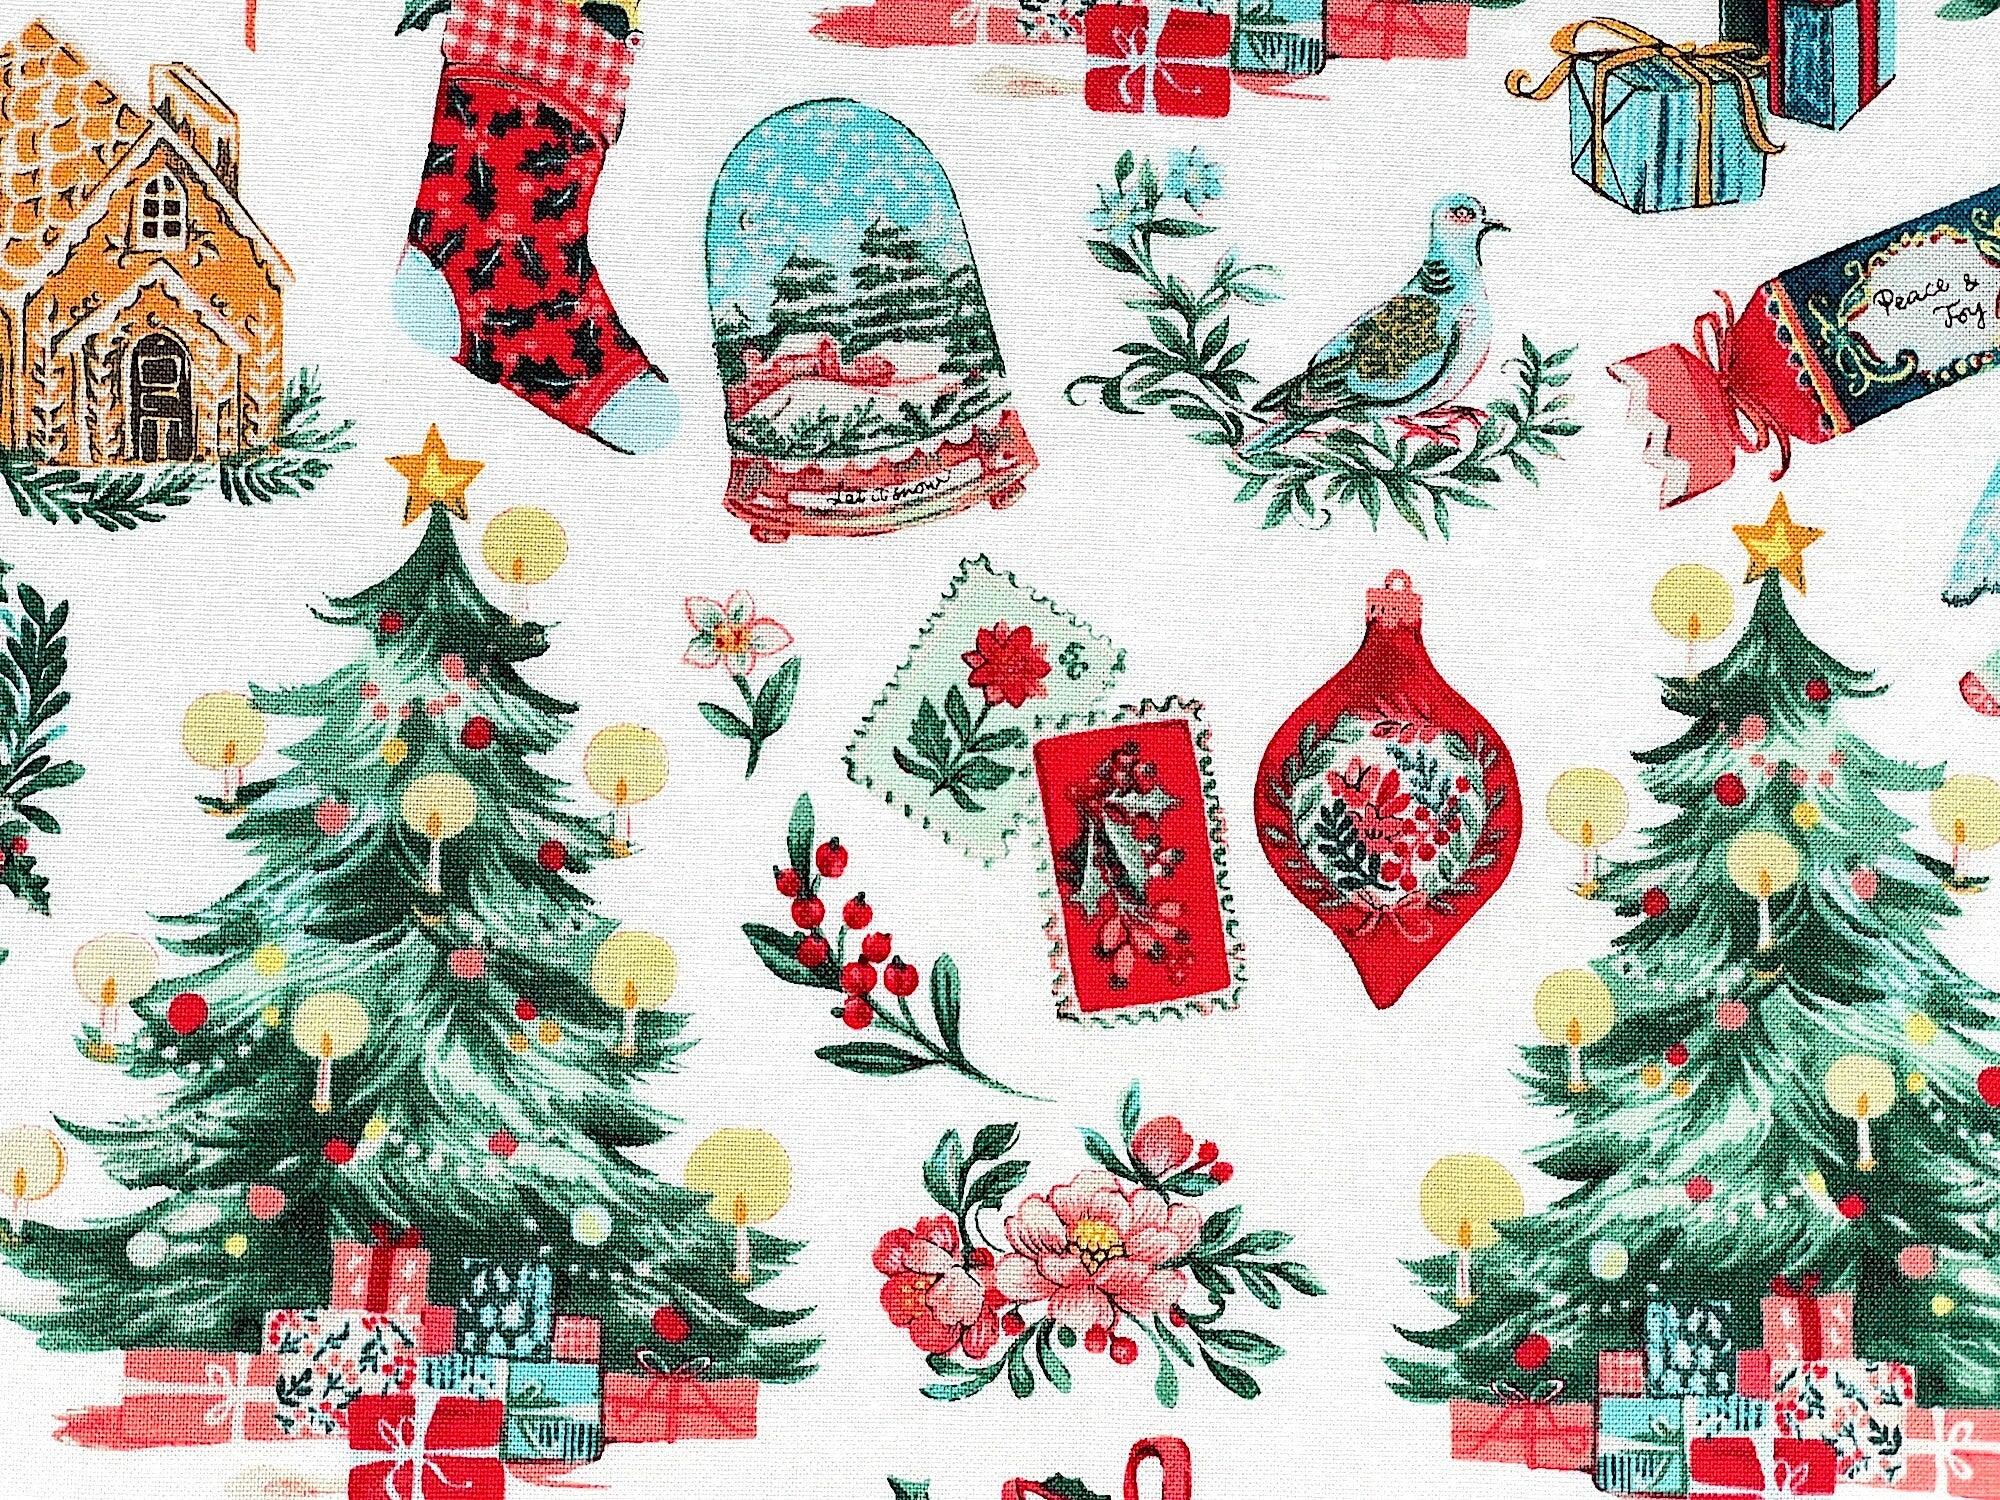 Close up of ornaments, flowers, birds, Christmas tree, stockings and more.